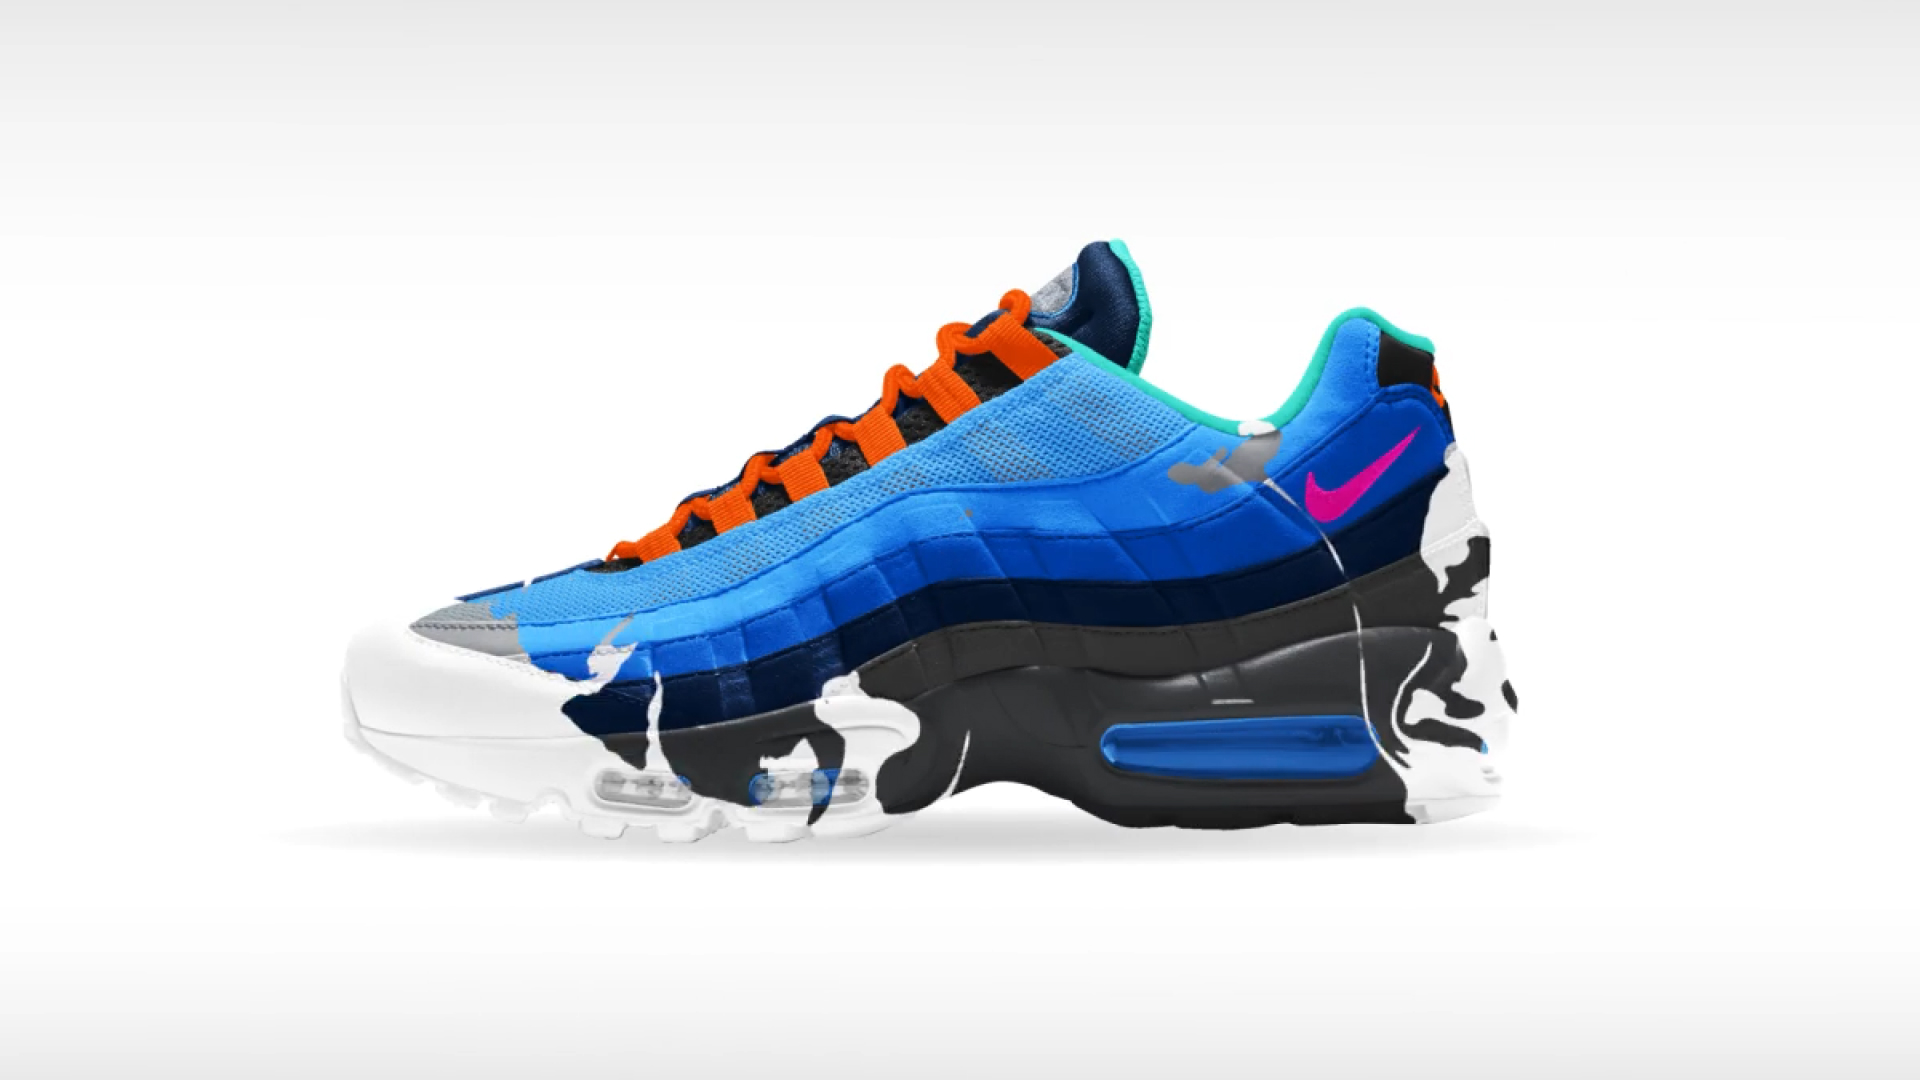 A custom designed Nike sneaker using the web application designed and developed by Supply.